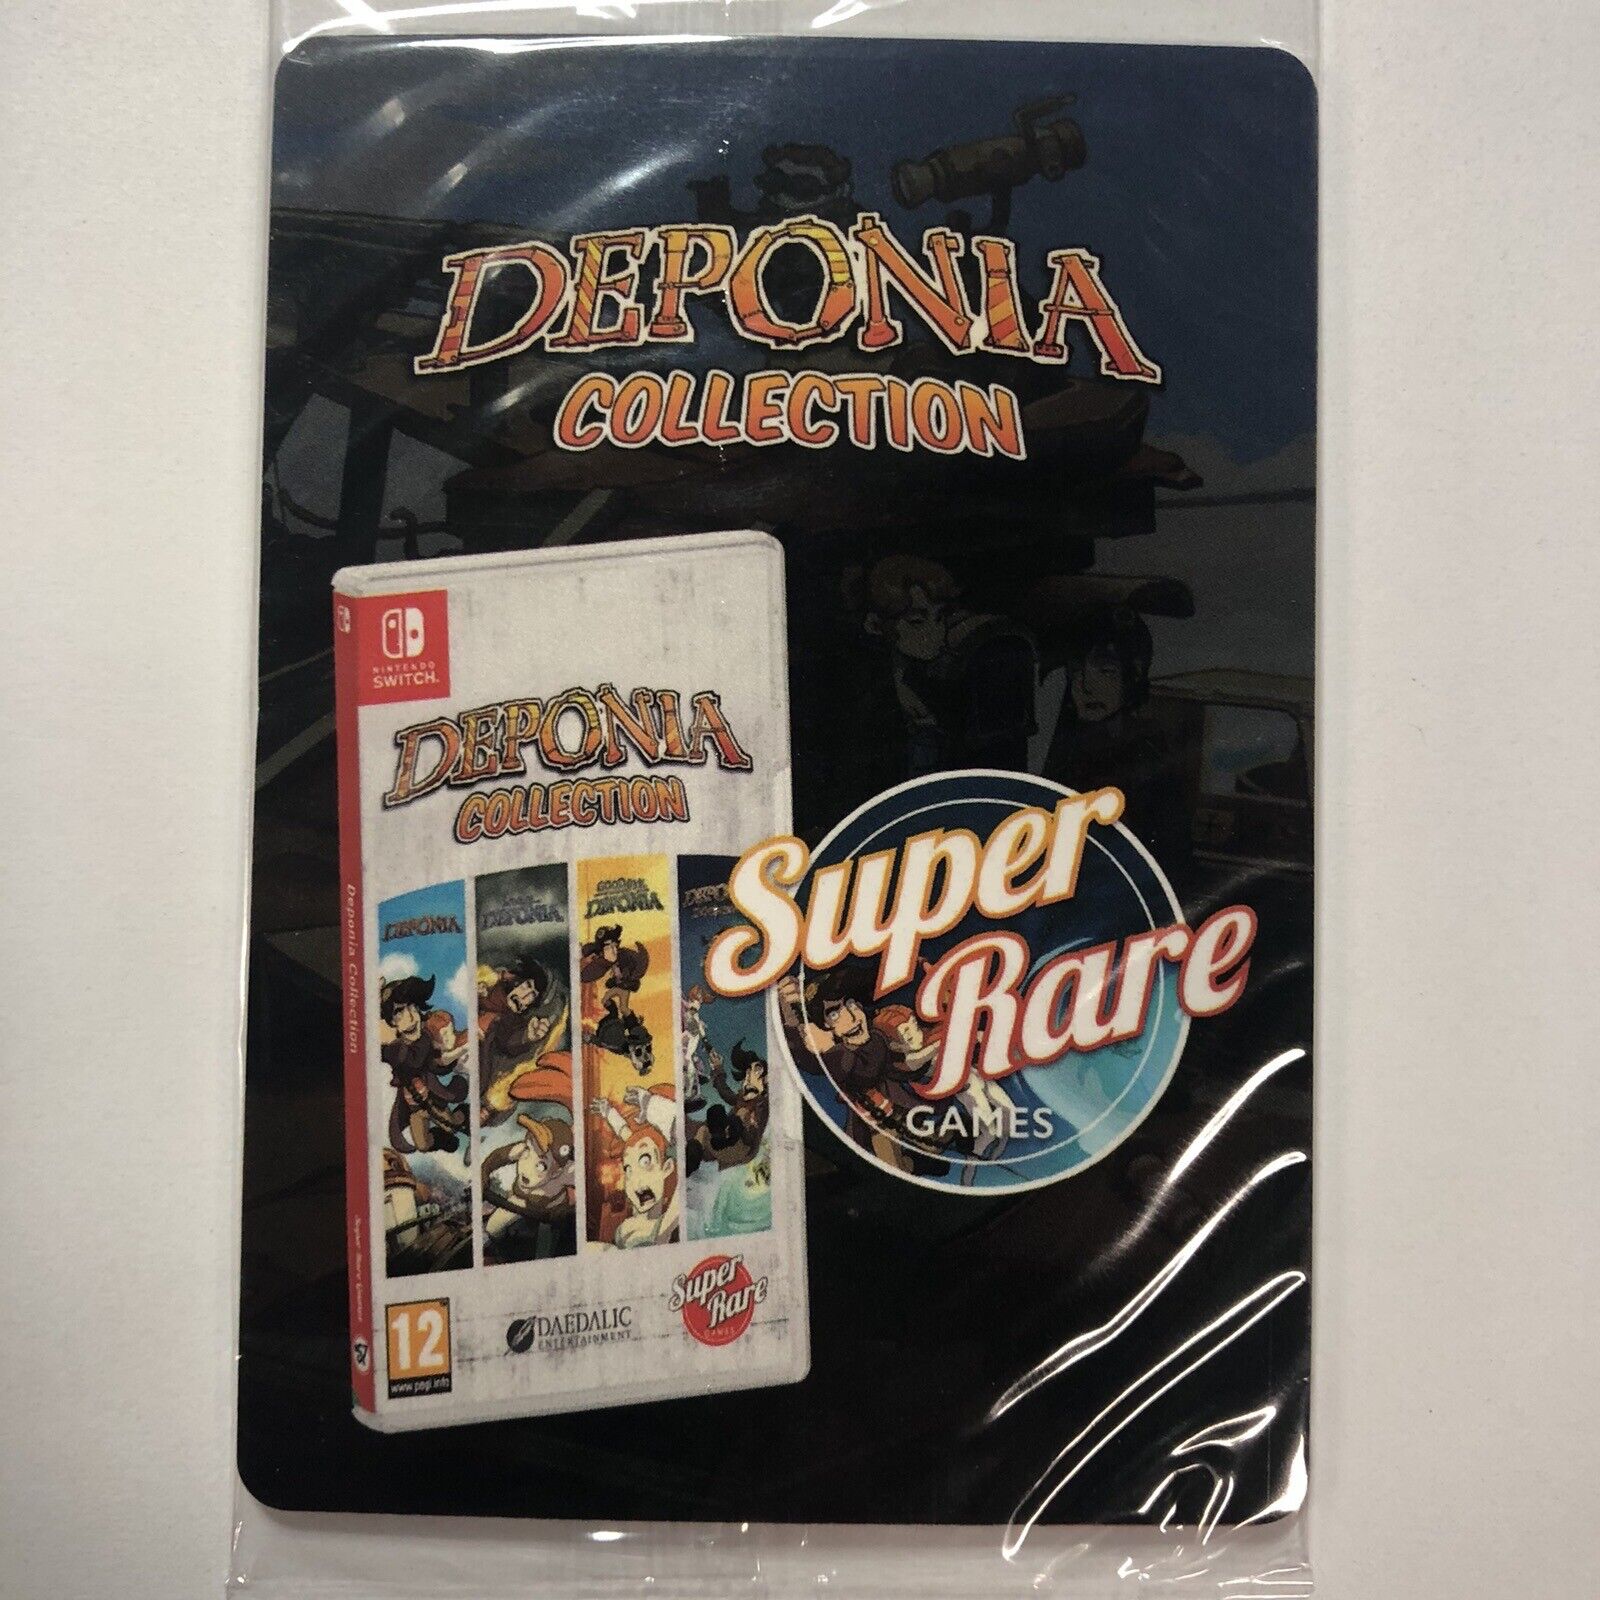 Deponia Collection Video Game Sealed 4 Trading Card Pack Super Rare Games SRG